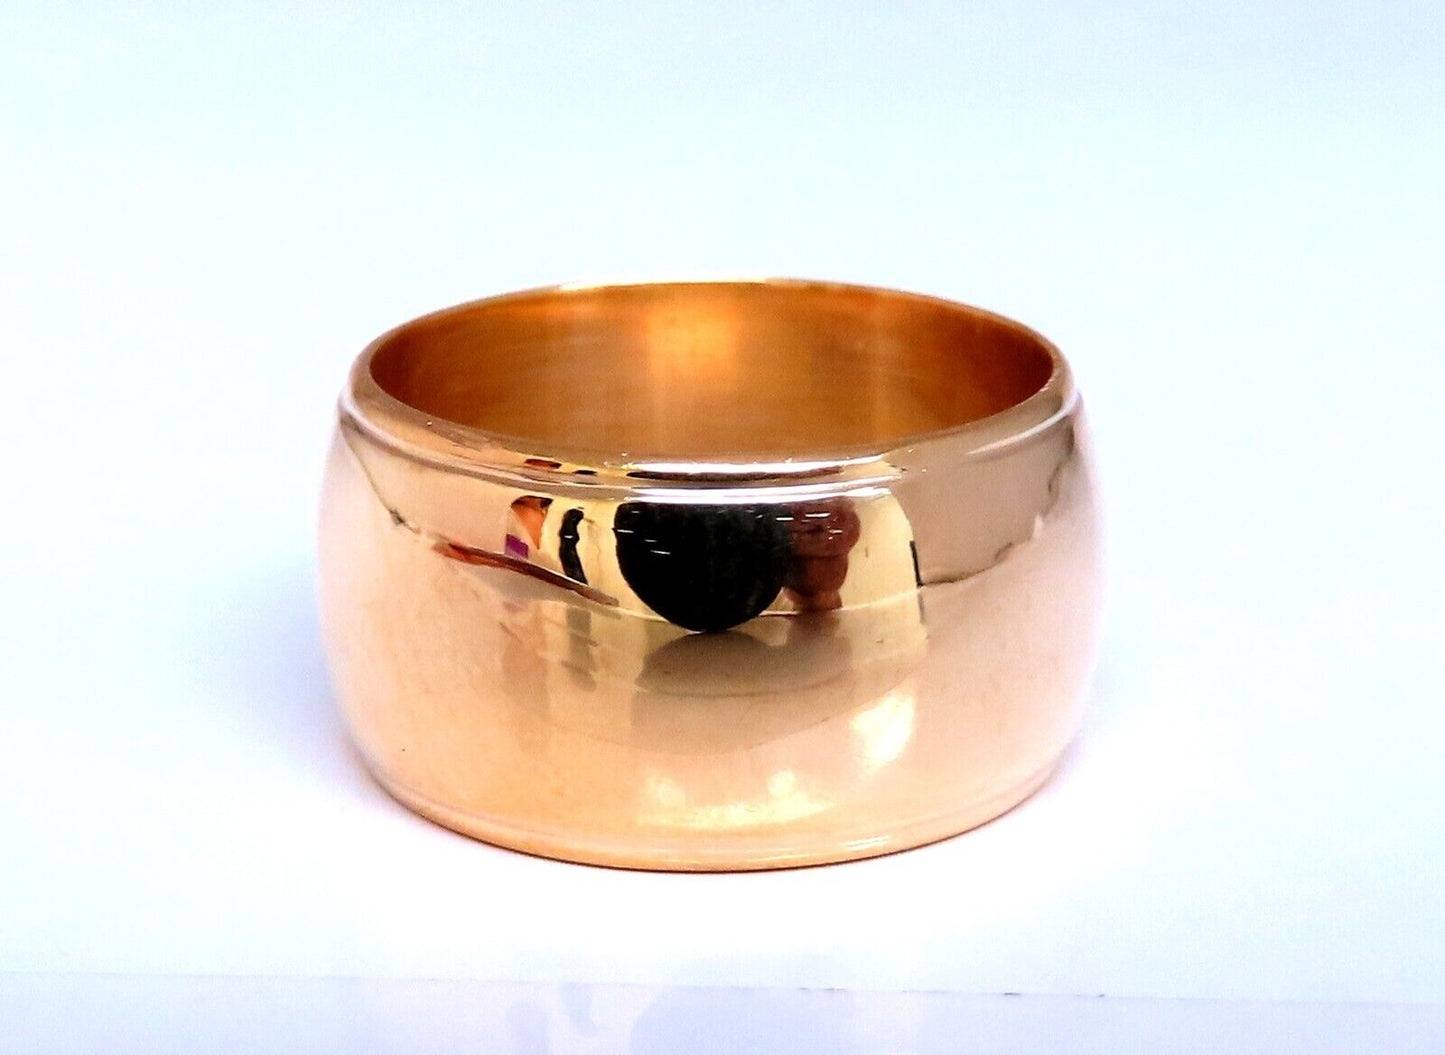 Mod Wide Solid 10.5mm Band 14kt Gold 6.75